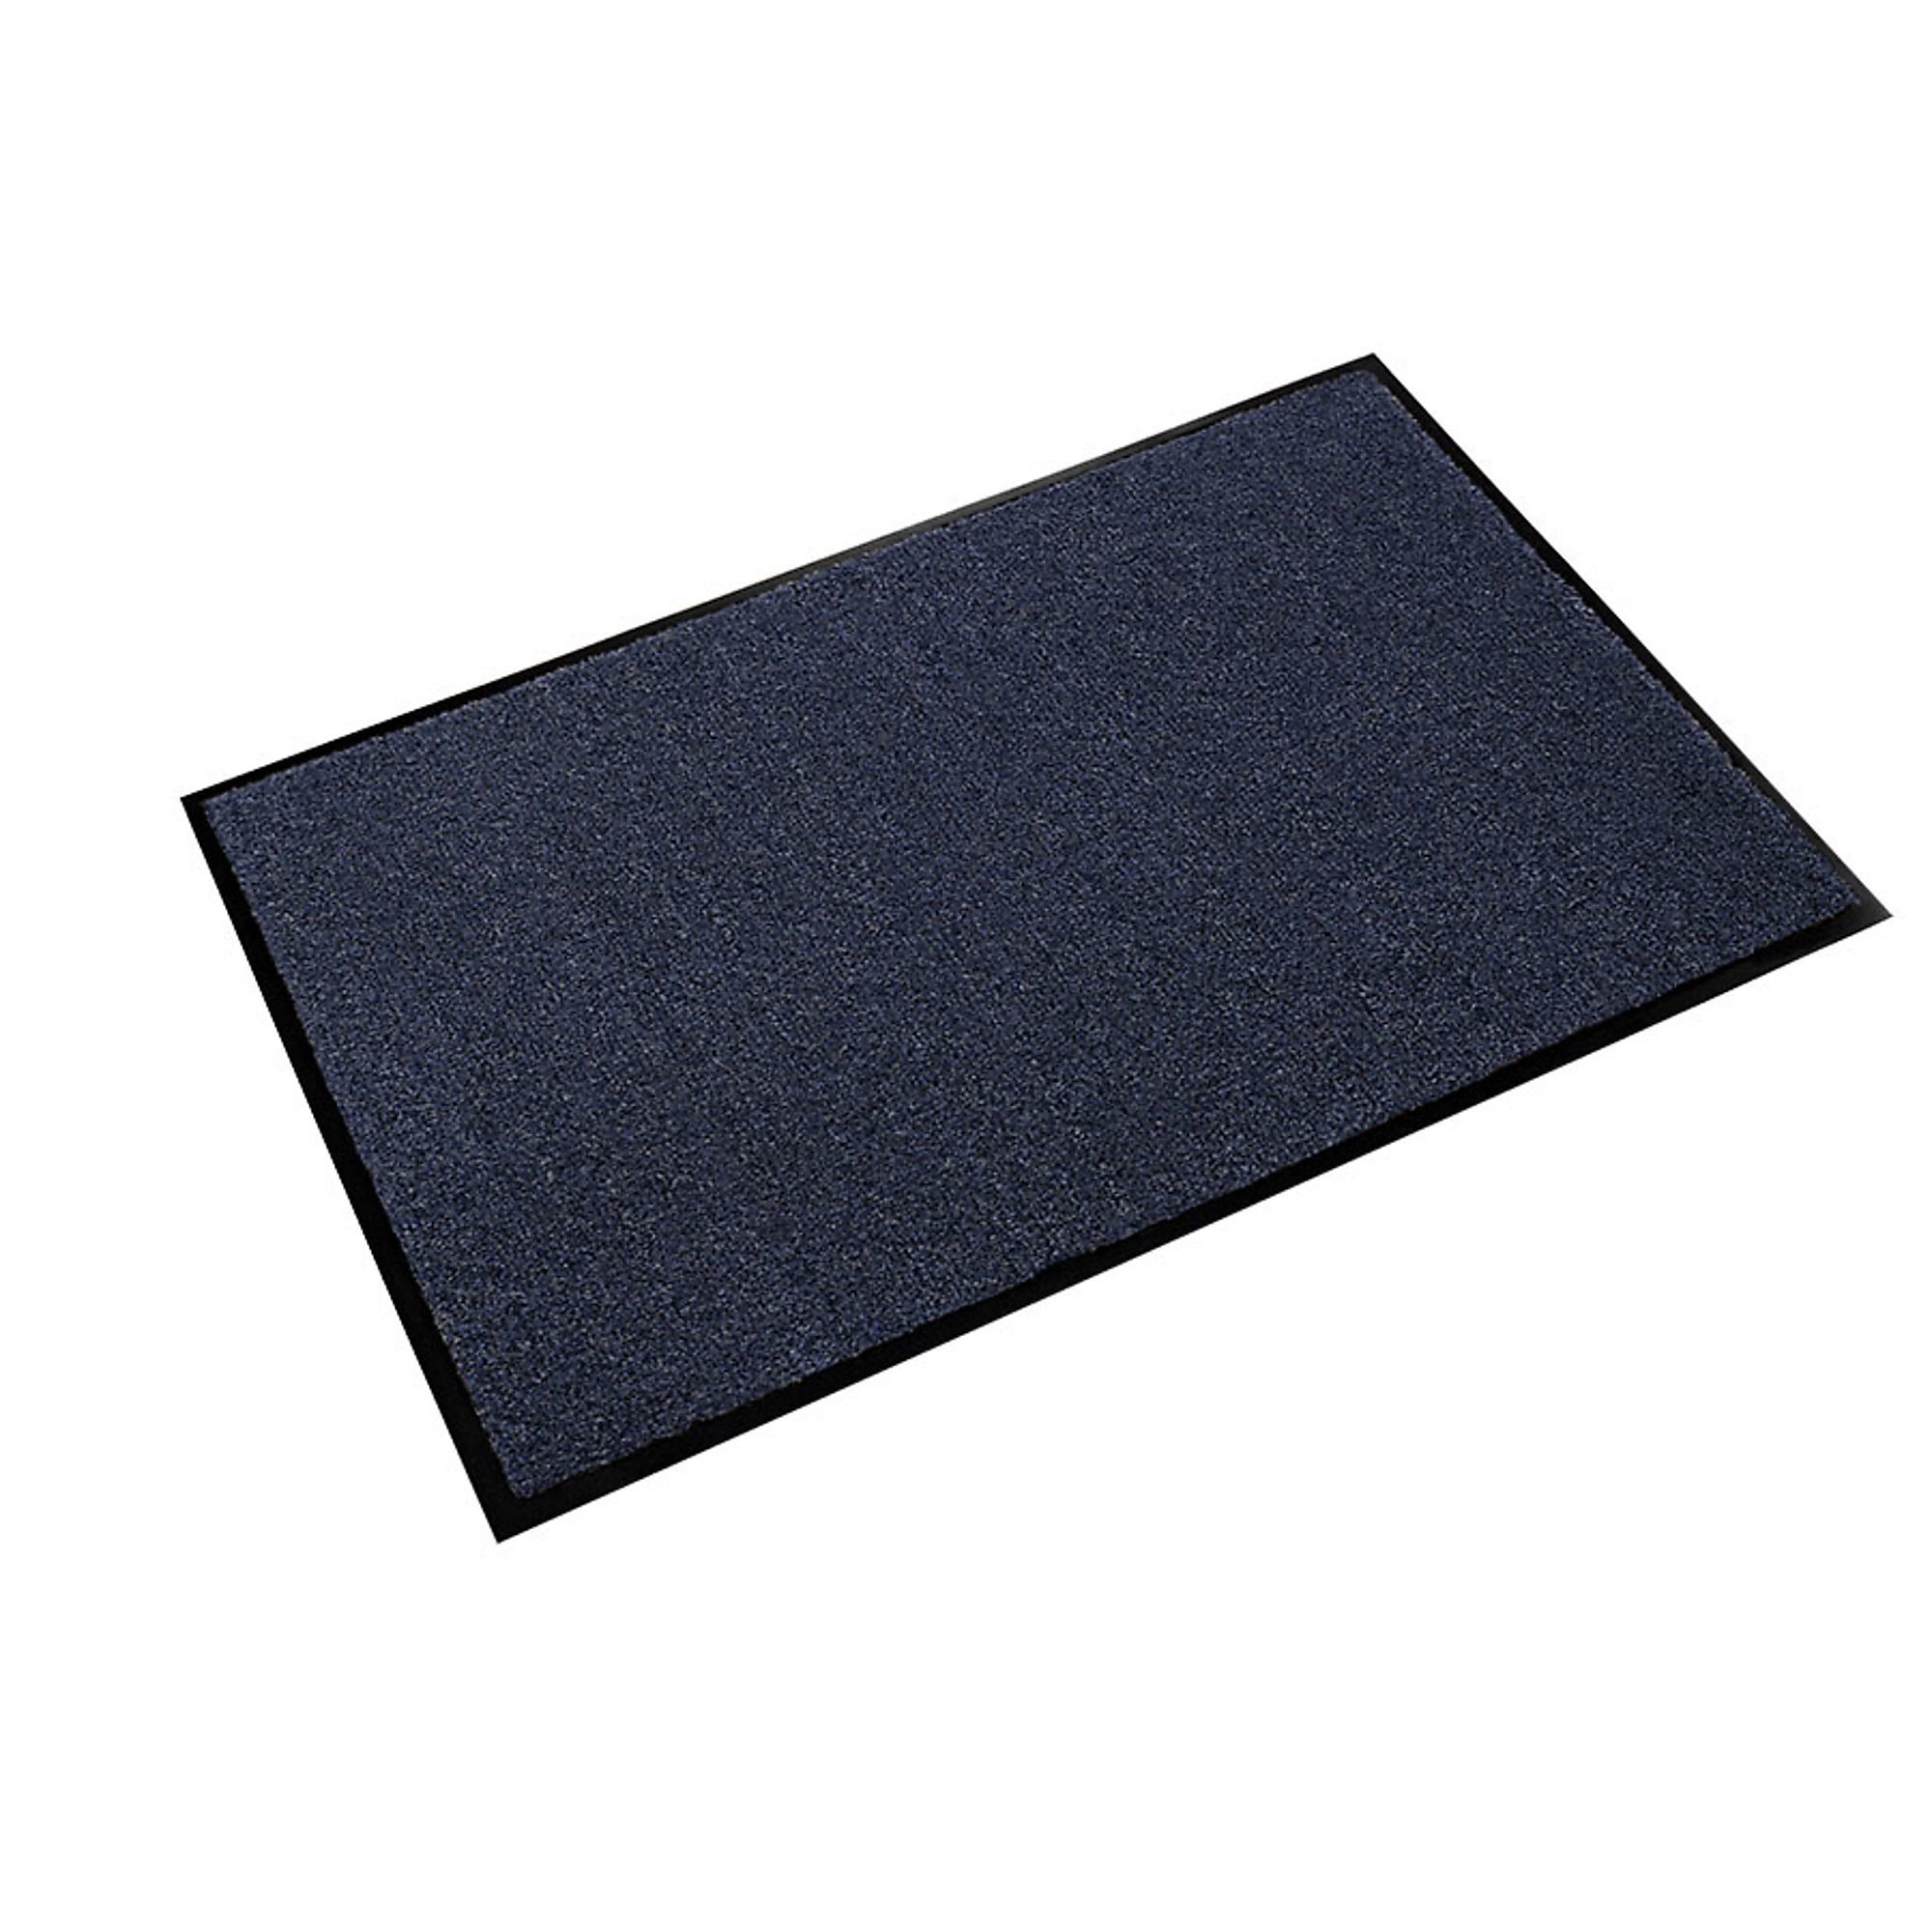 Crown Matting Technologies, Rely-On Olefin 4ft.x10ft. Navy Blue, Width 48 in, Length 120 in, Thickness 3/8 in, Model GS 0410NB